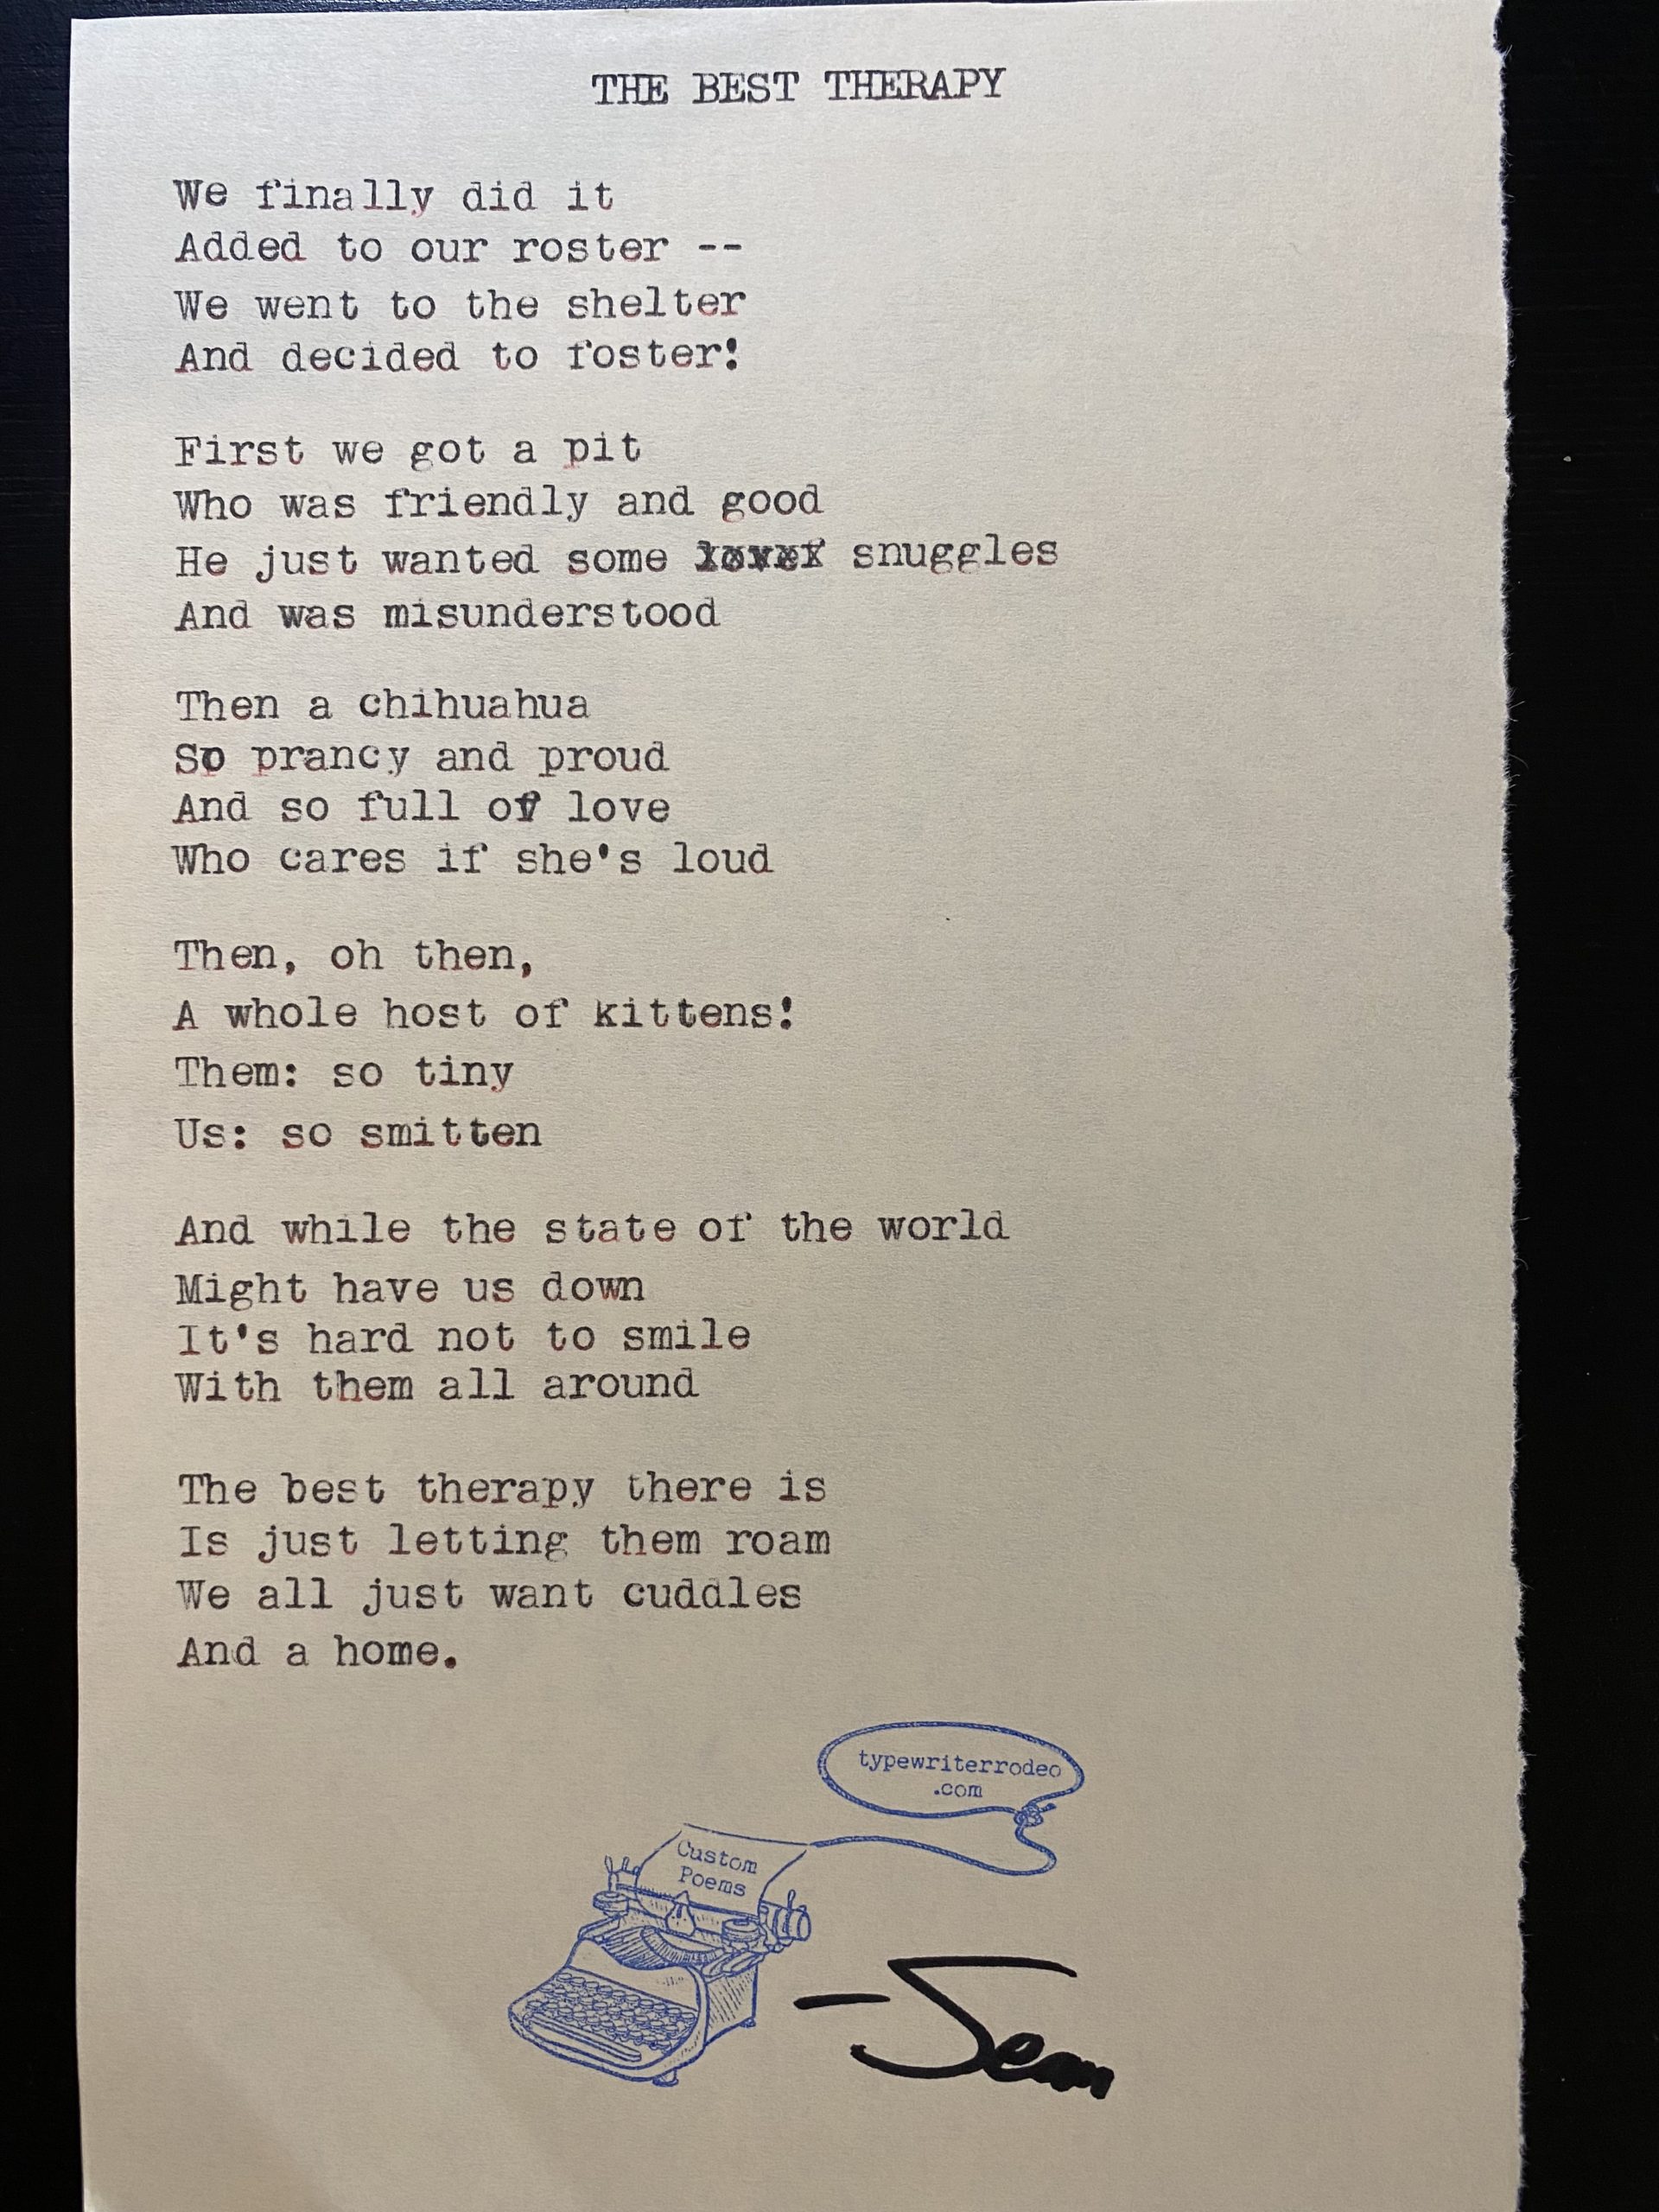 the typewritten poem on a torn piece of paper